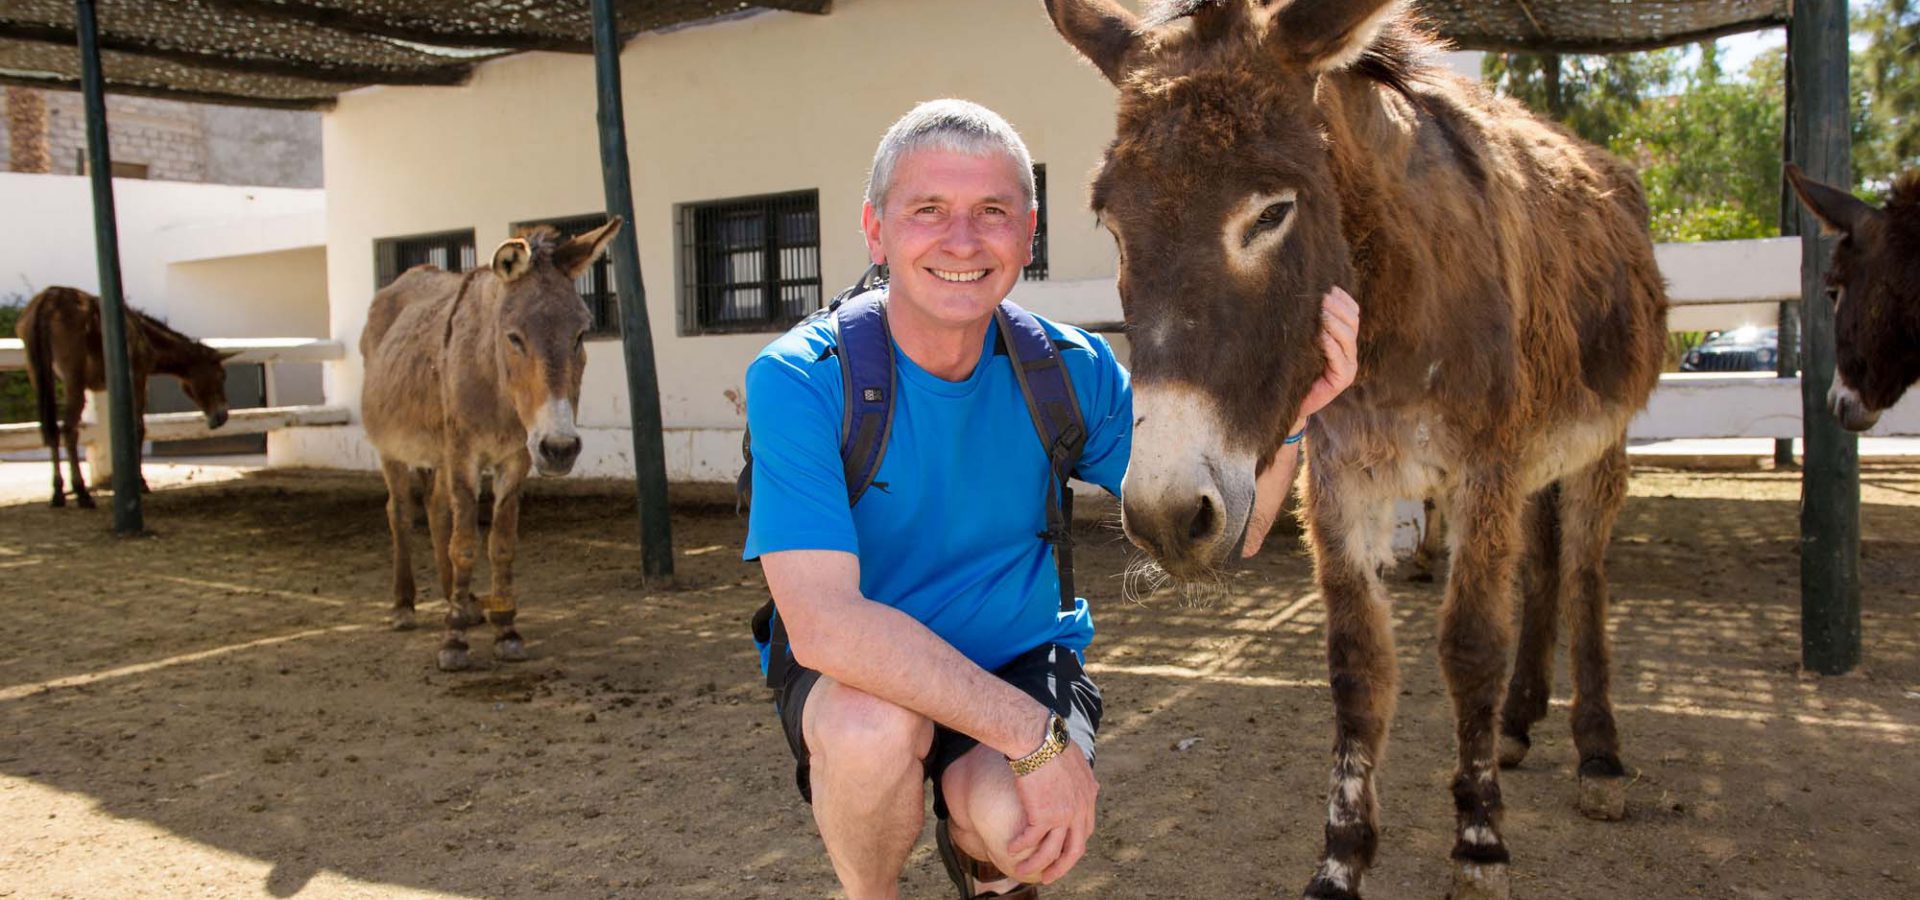 Man crouched down next to donkey